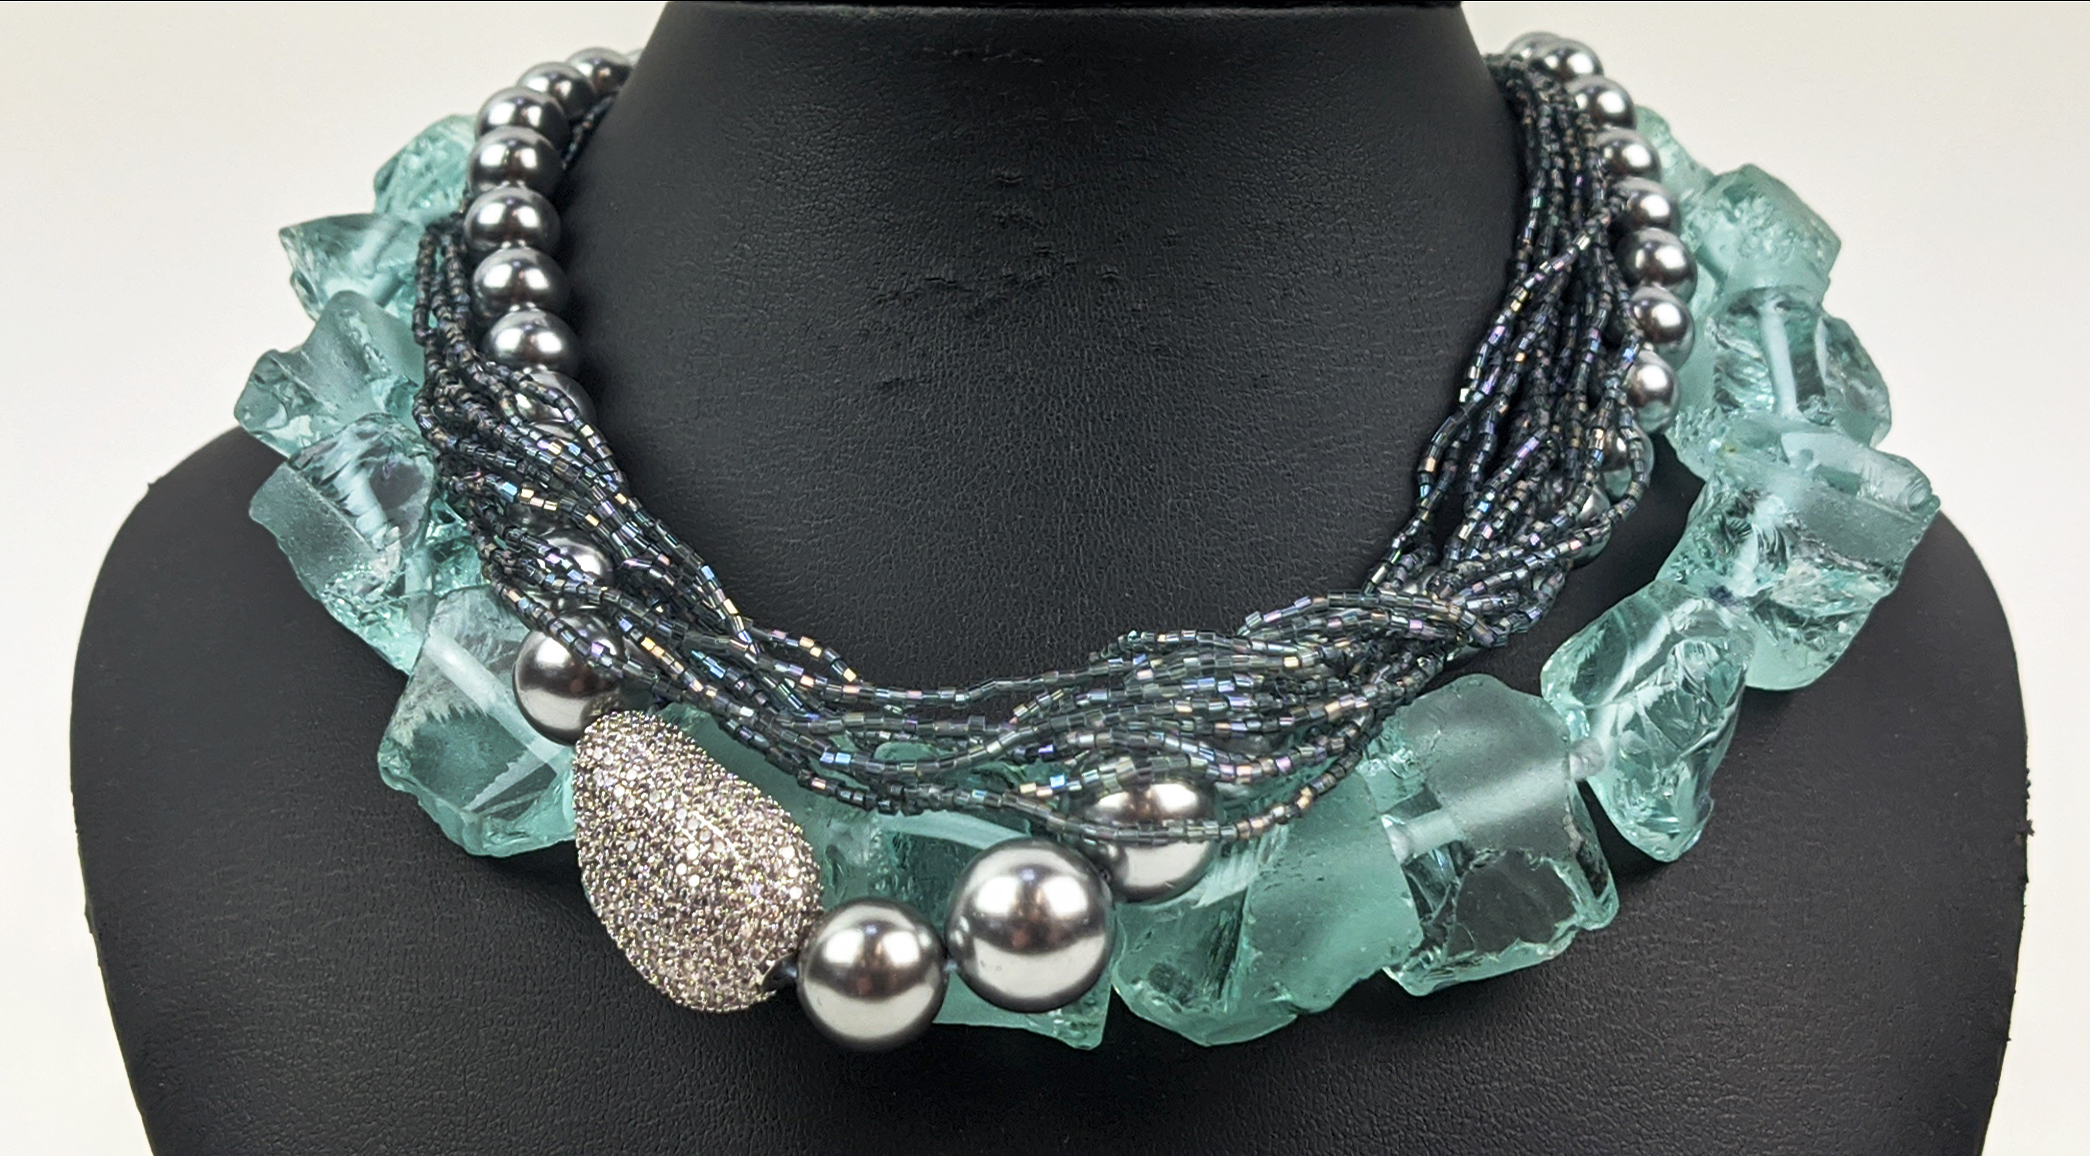 AN AQUAMARINE COLOURED ROUGH STONE NECKLACE, with a paste diamond clasp, 46cm long, together with